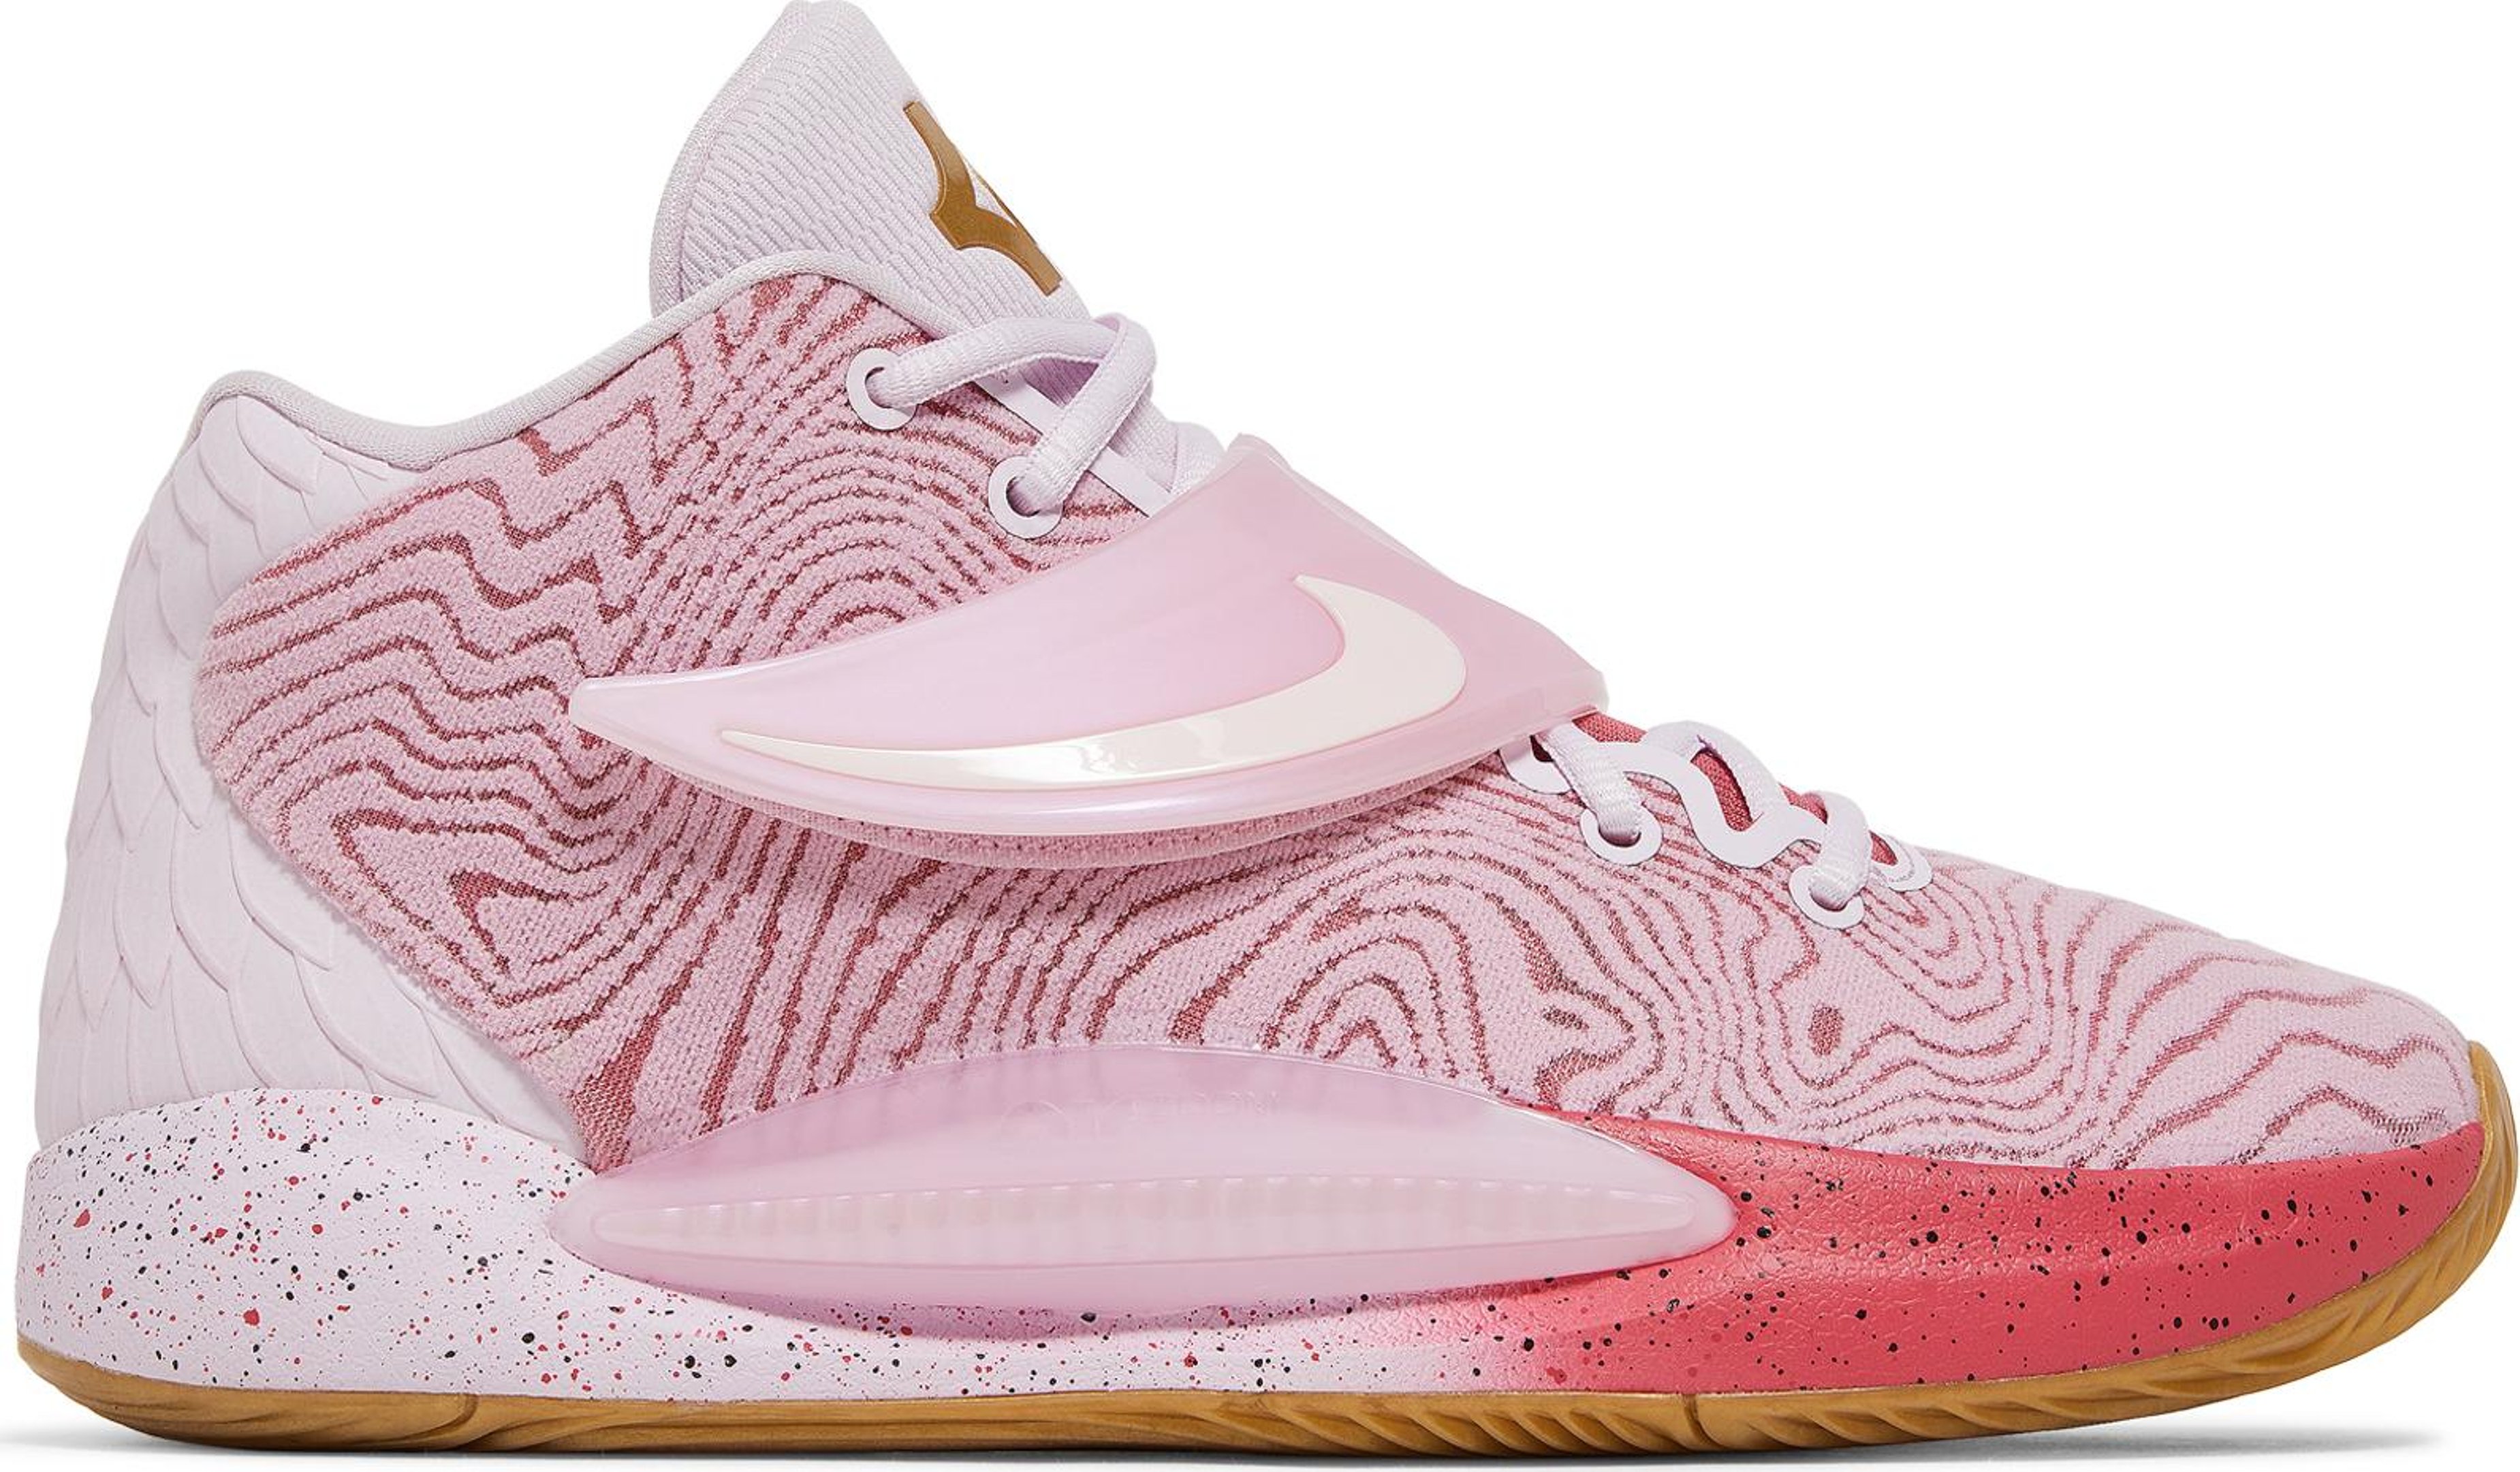 Buy KD 14 'Aunt Pearl' DC9379 600 Pink GOAT